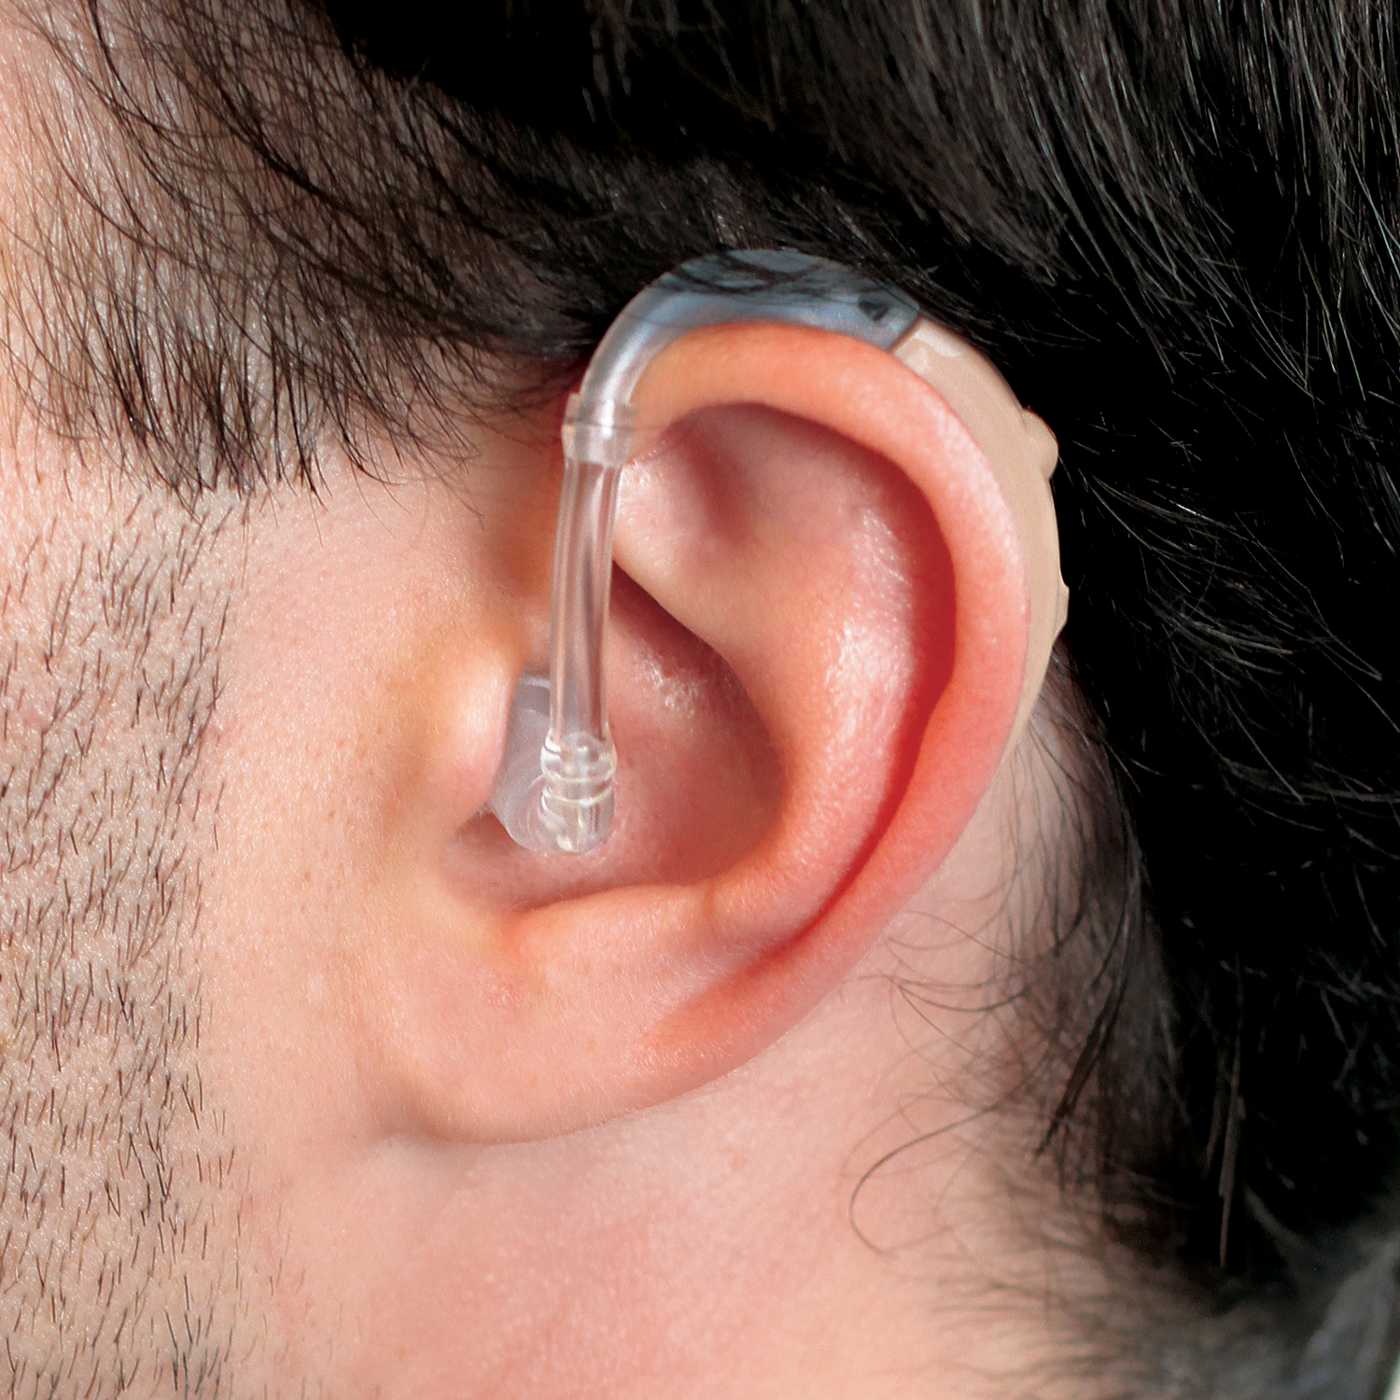 Lucid Audio Behind The Ear Enrich Pro Sound Hearing Aids; image 5 of 6